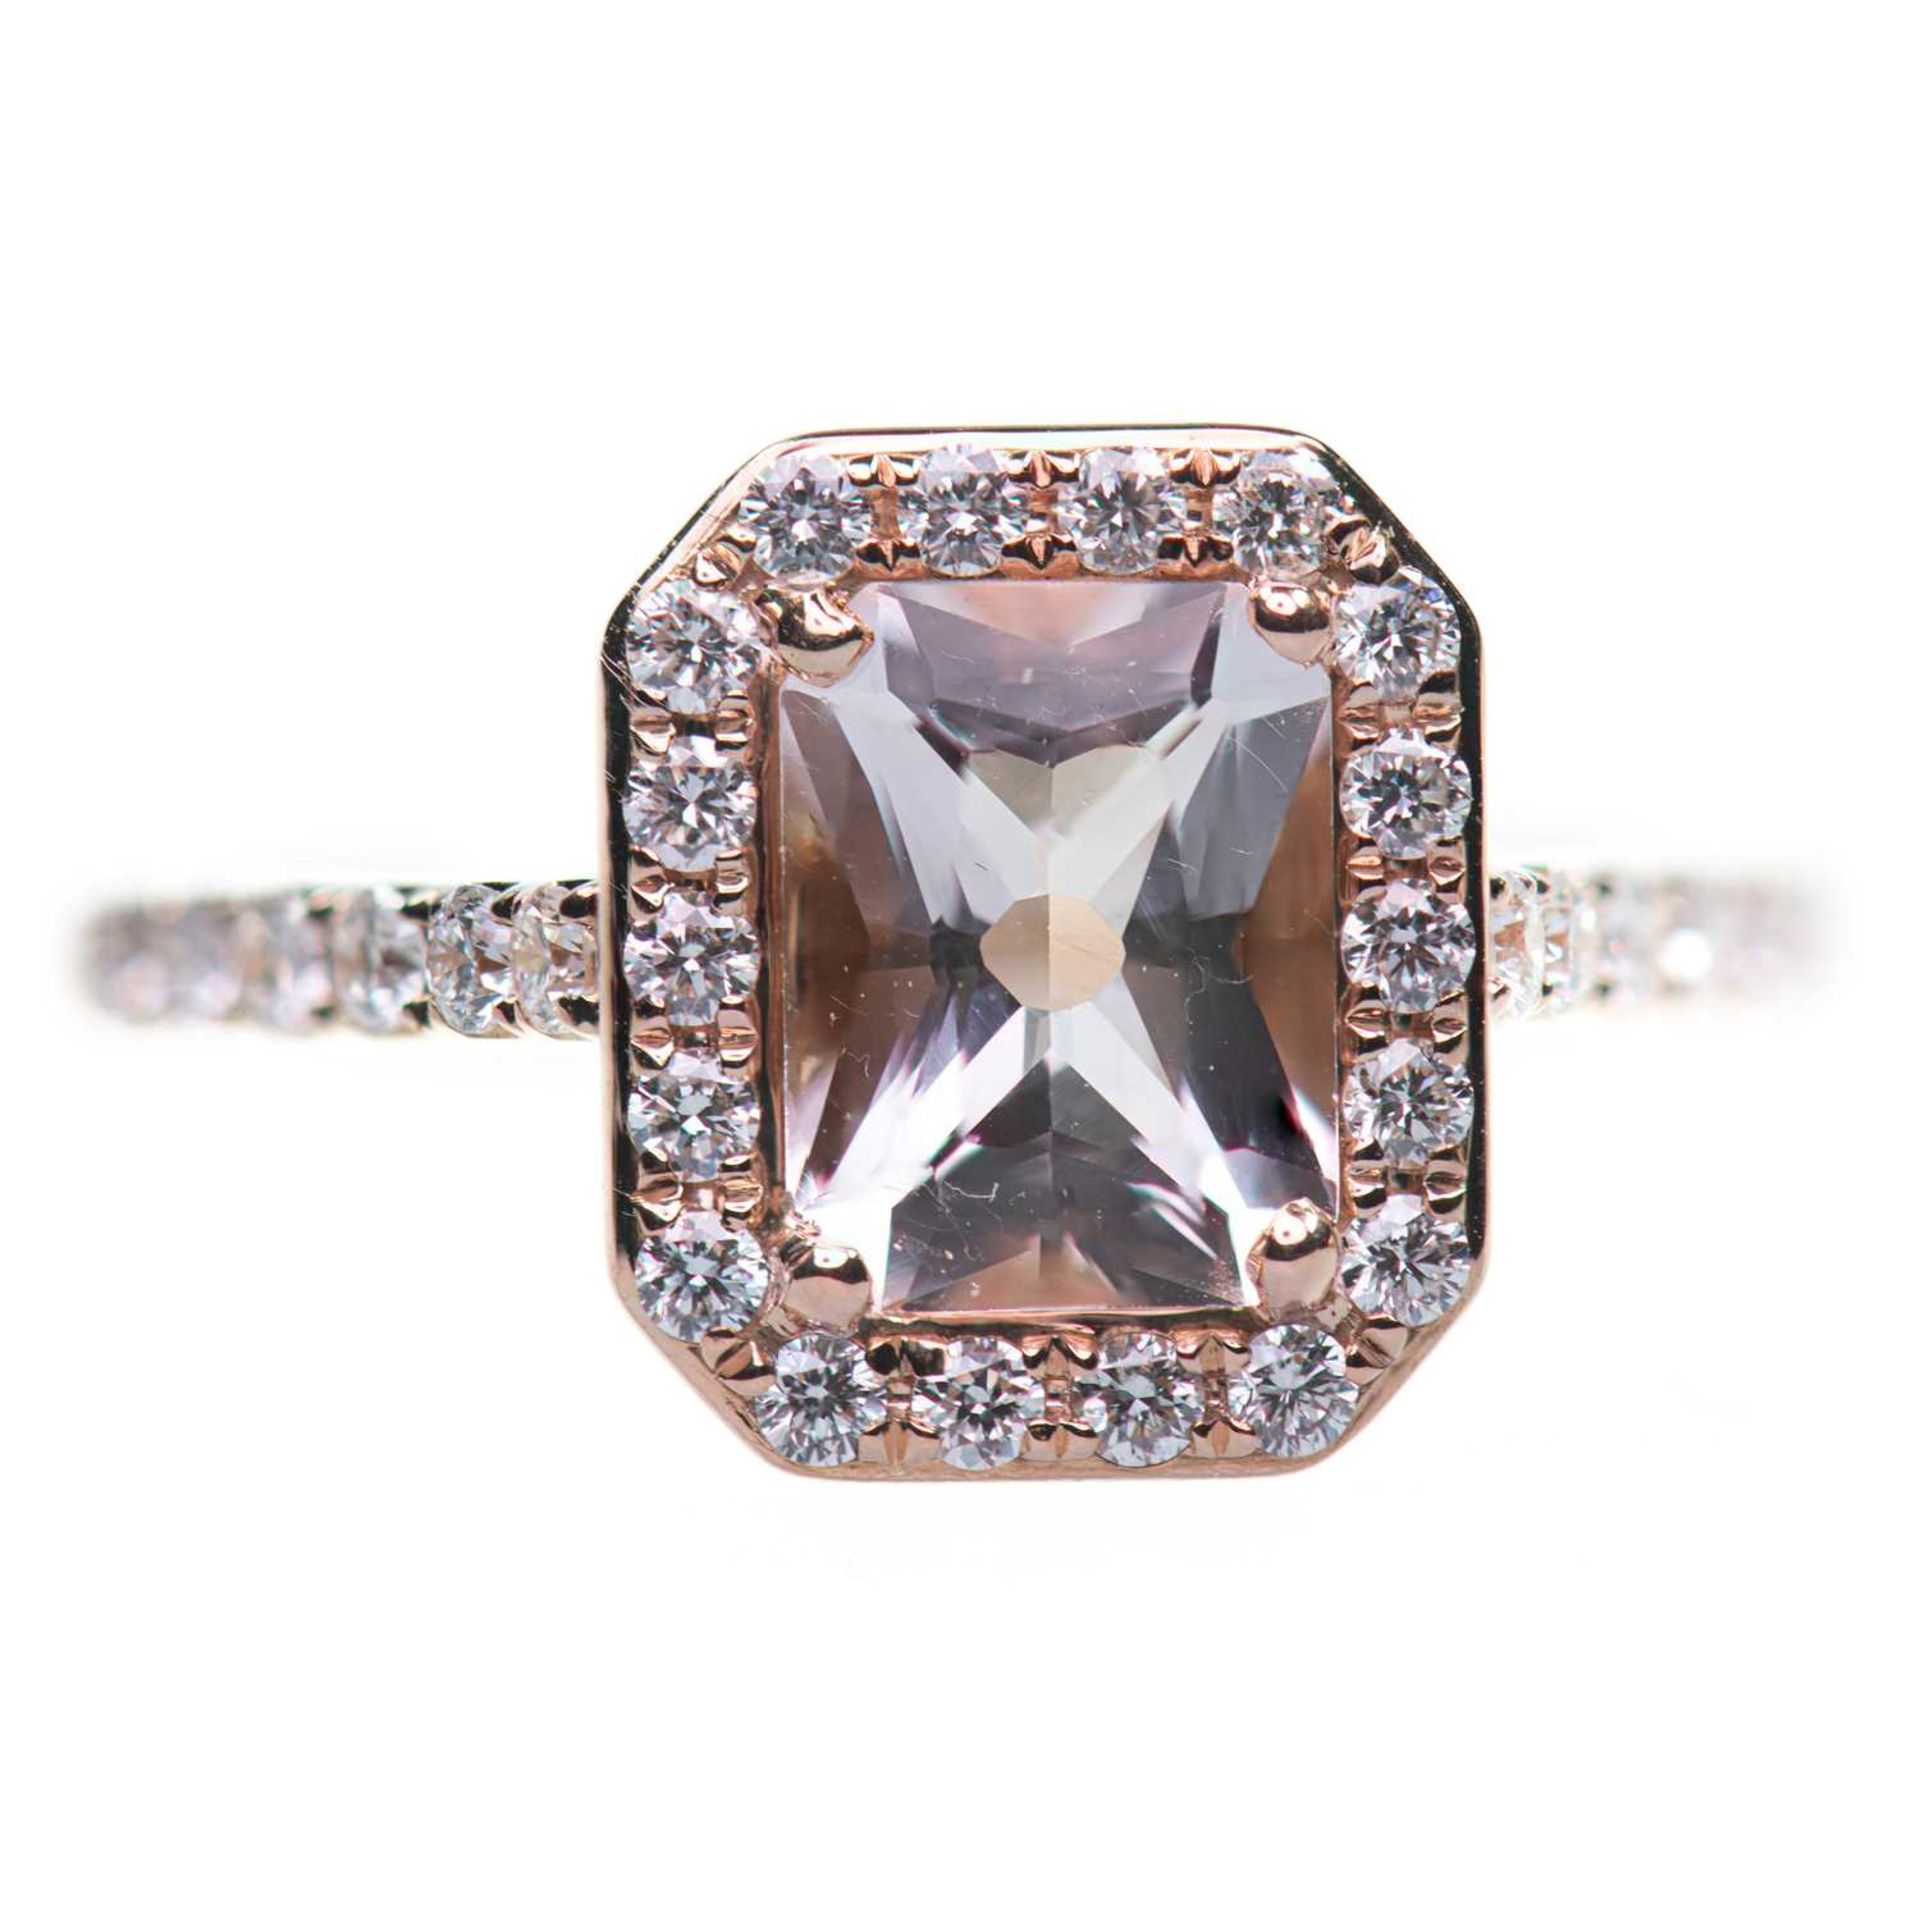 AN 18 CARAT ROSE GOLD MORGANITE AND DIAMOND CLUSTER RING